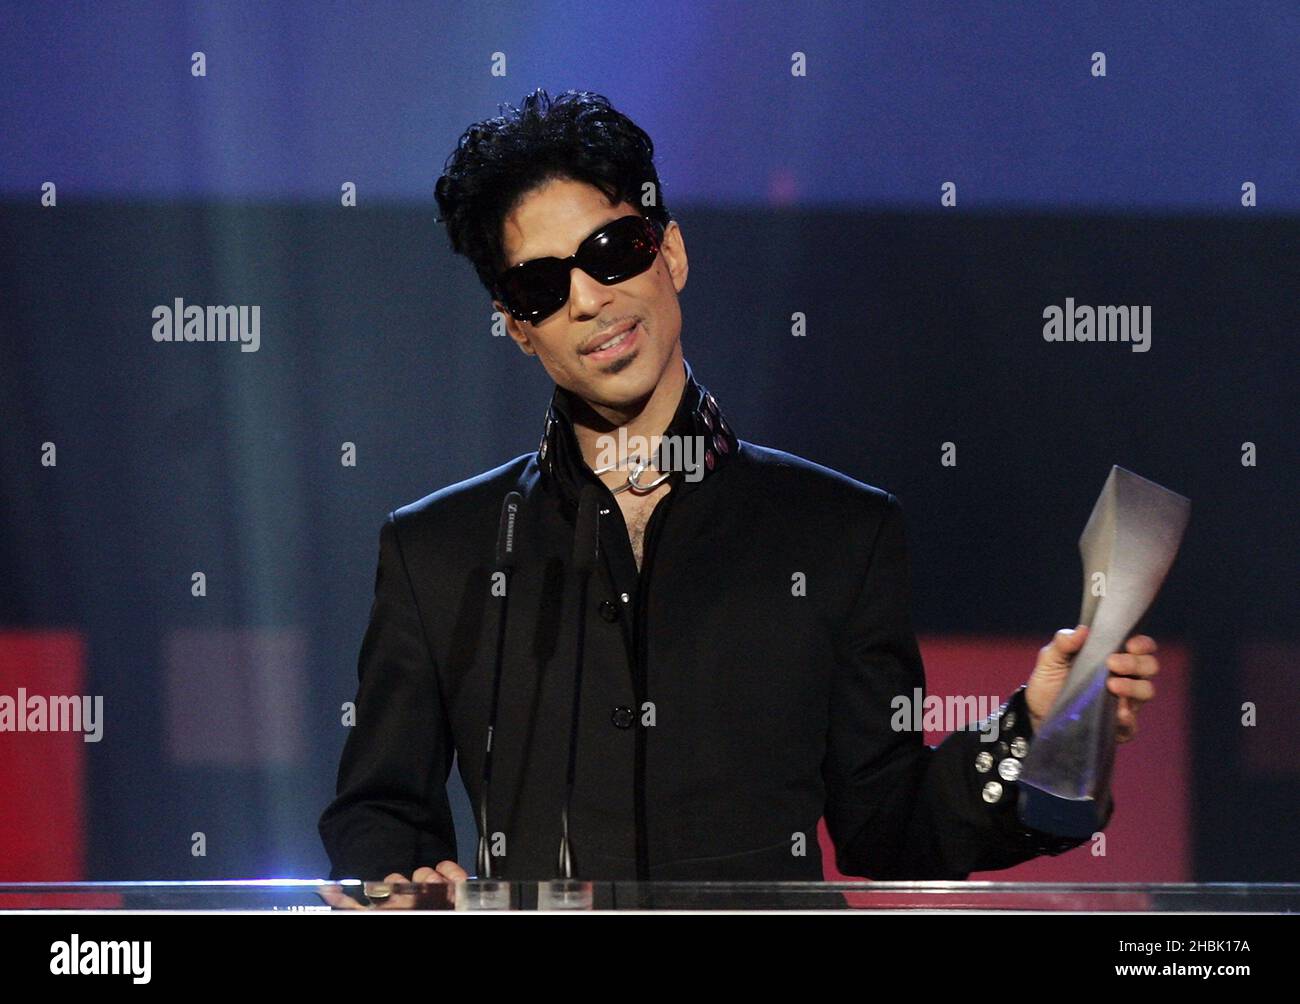 Prince is inducted into the UK Music Hall of Fame inside Alexandra Palace in north London, November 14, 2006. An international line up of music legends and celebrities were gathering to for 2006's UK Music Hall of Fame Induction Ceremony, hosted by Dermot O'Leary. Stock Photo